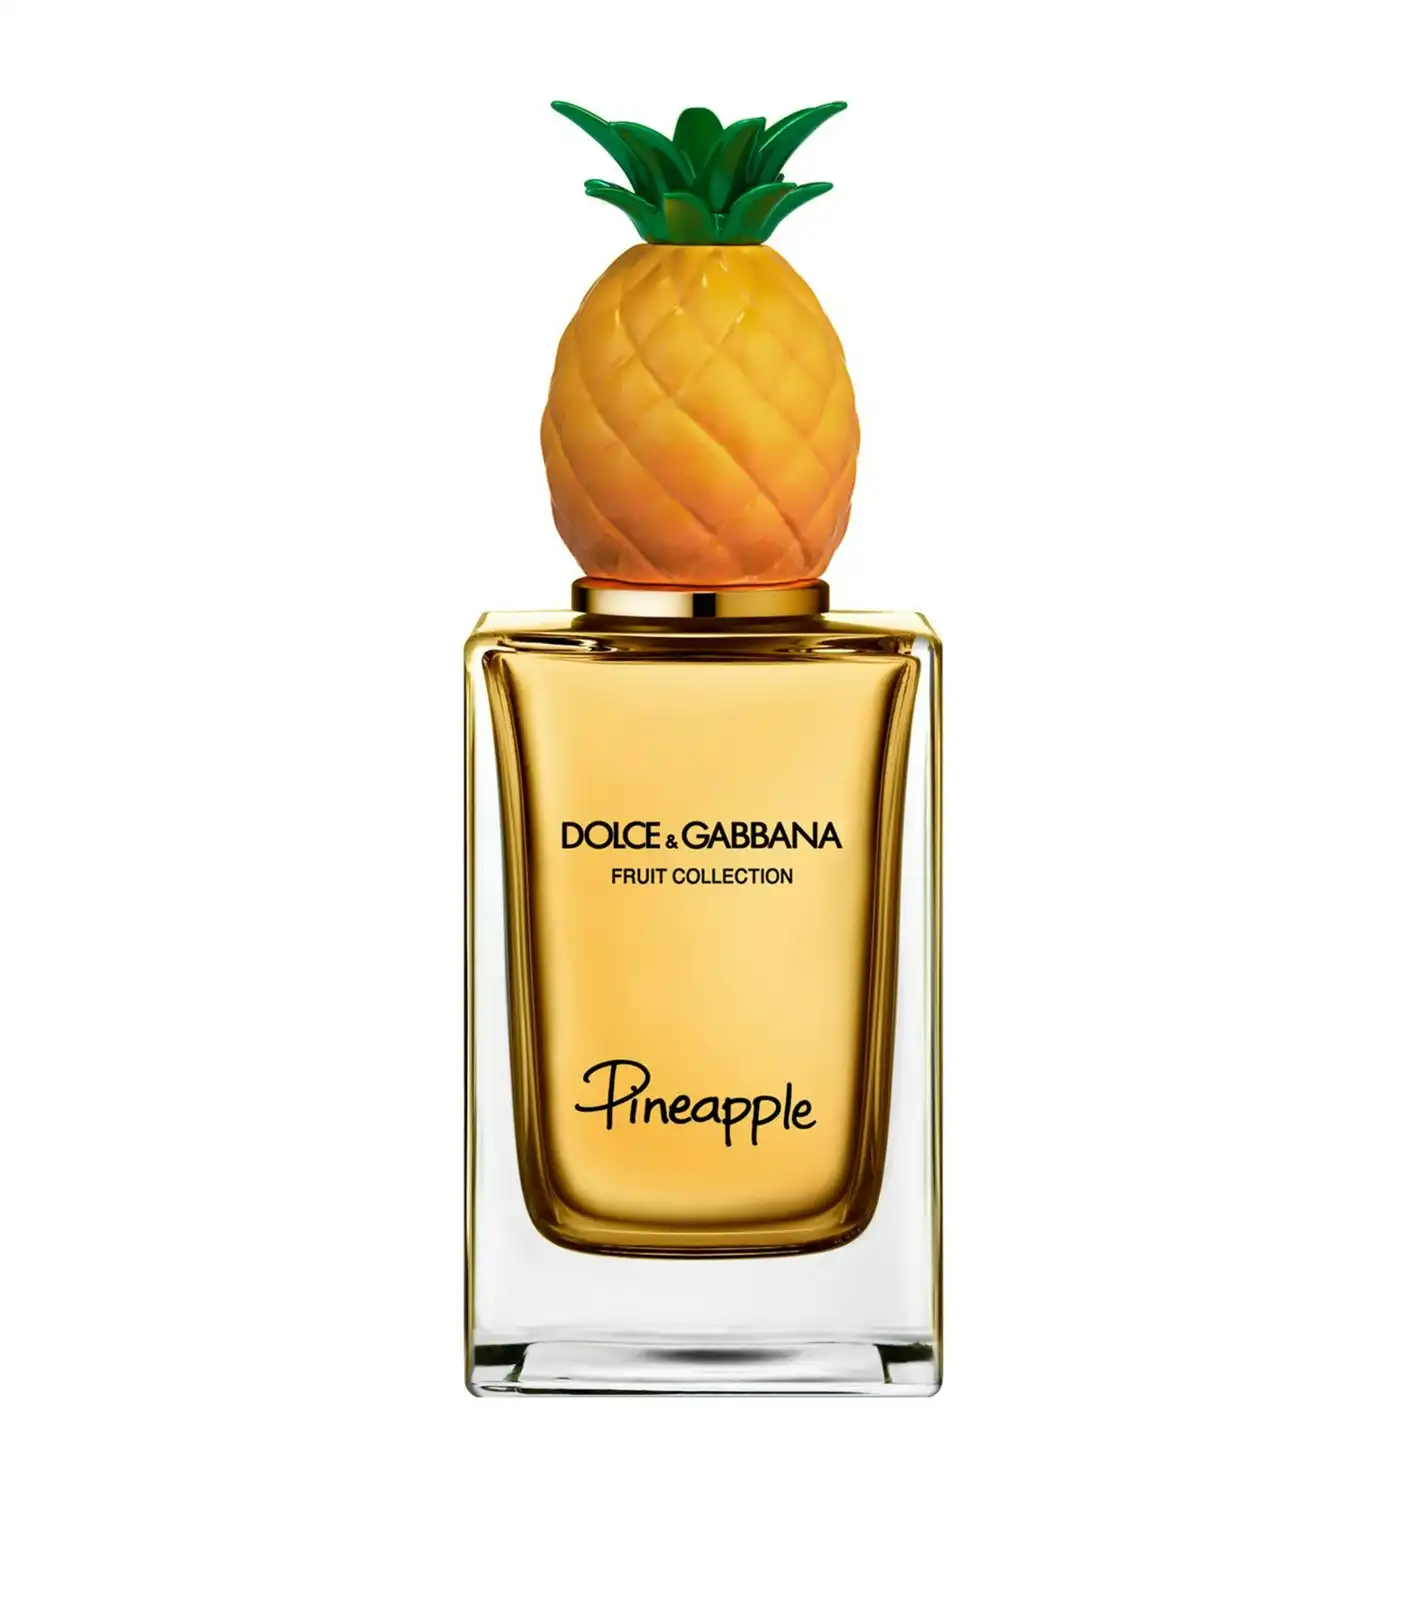 Dolce & Gabbana Fruit Collection Pineapple EDT 150ml unboxed